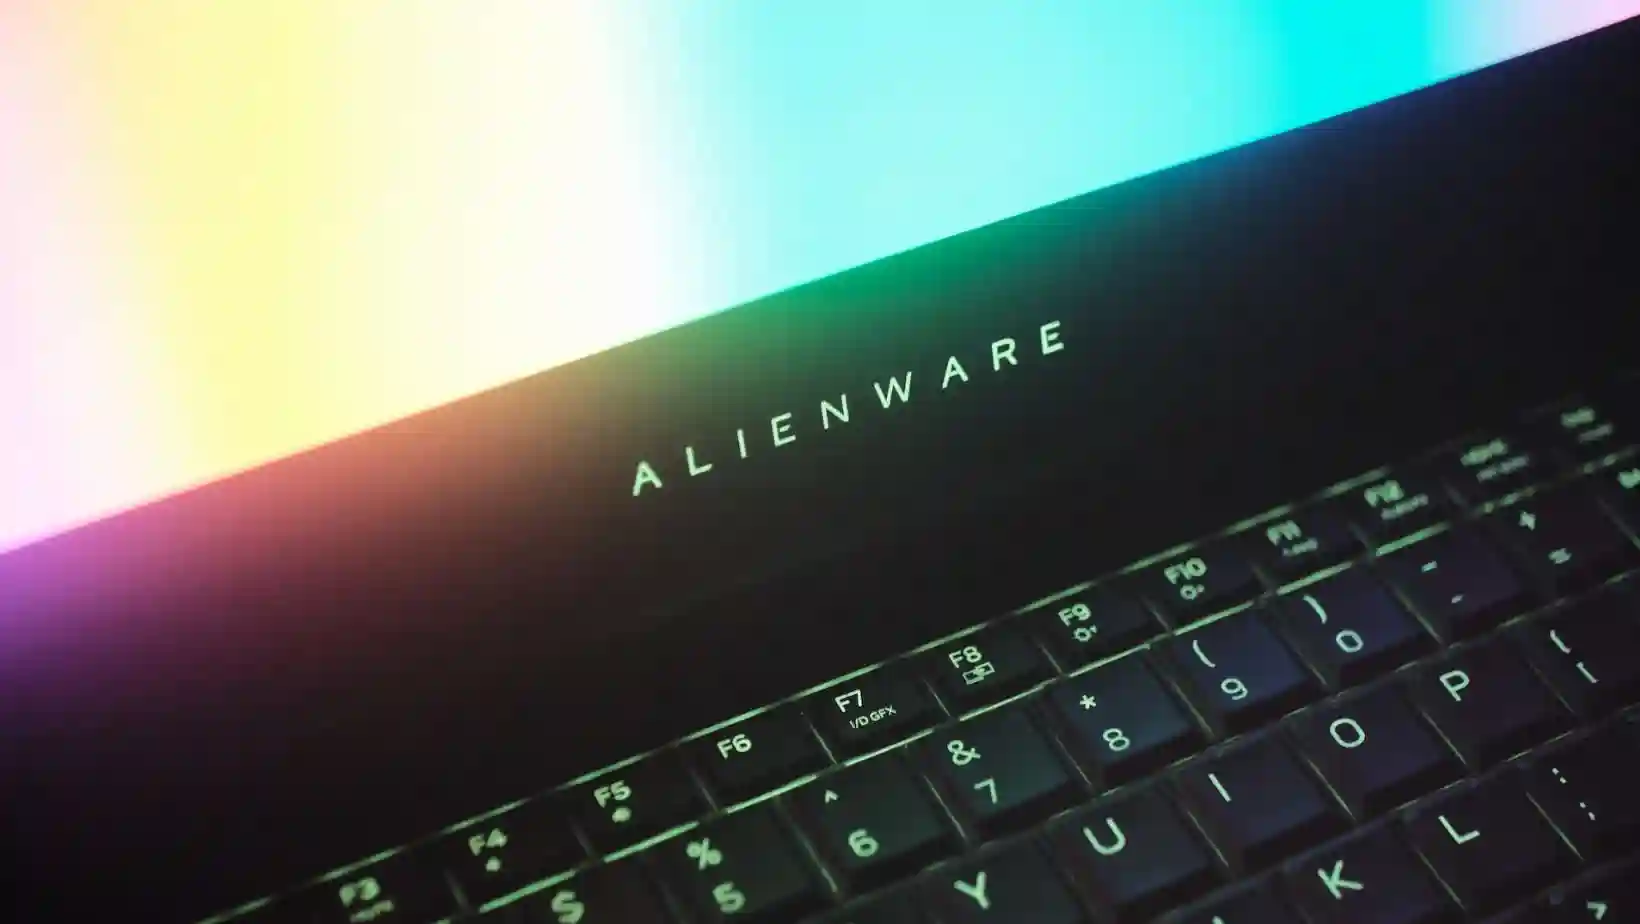 Why is Alienware so Expensive